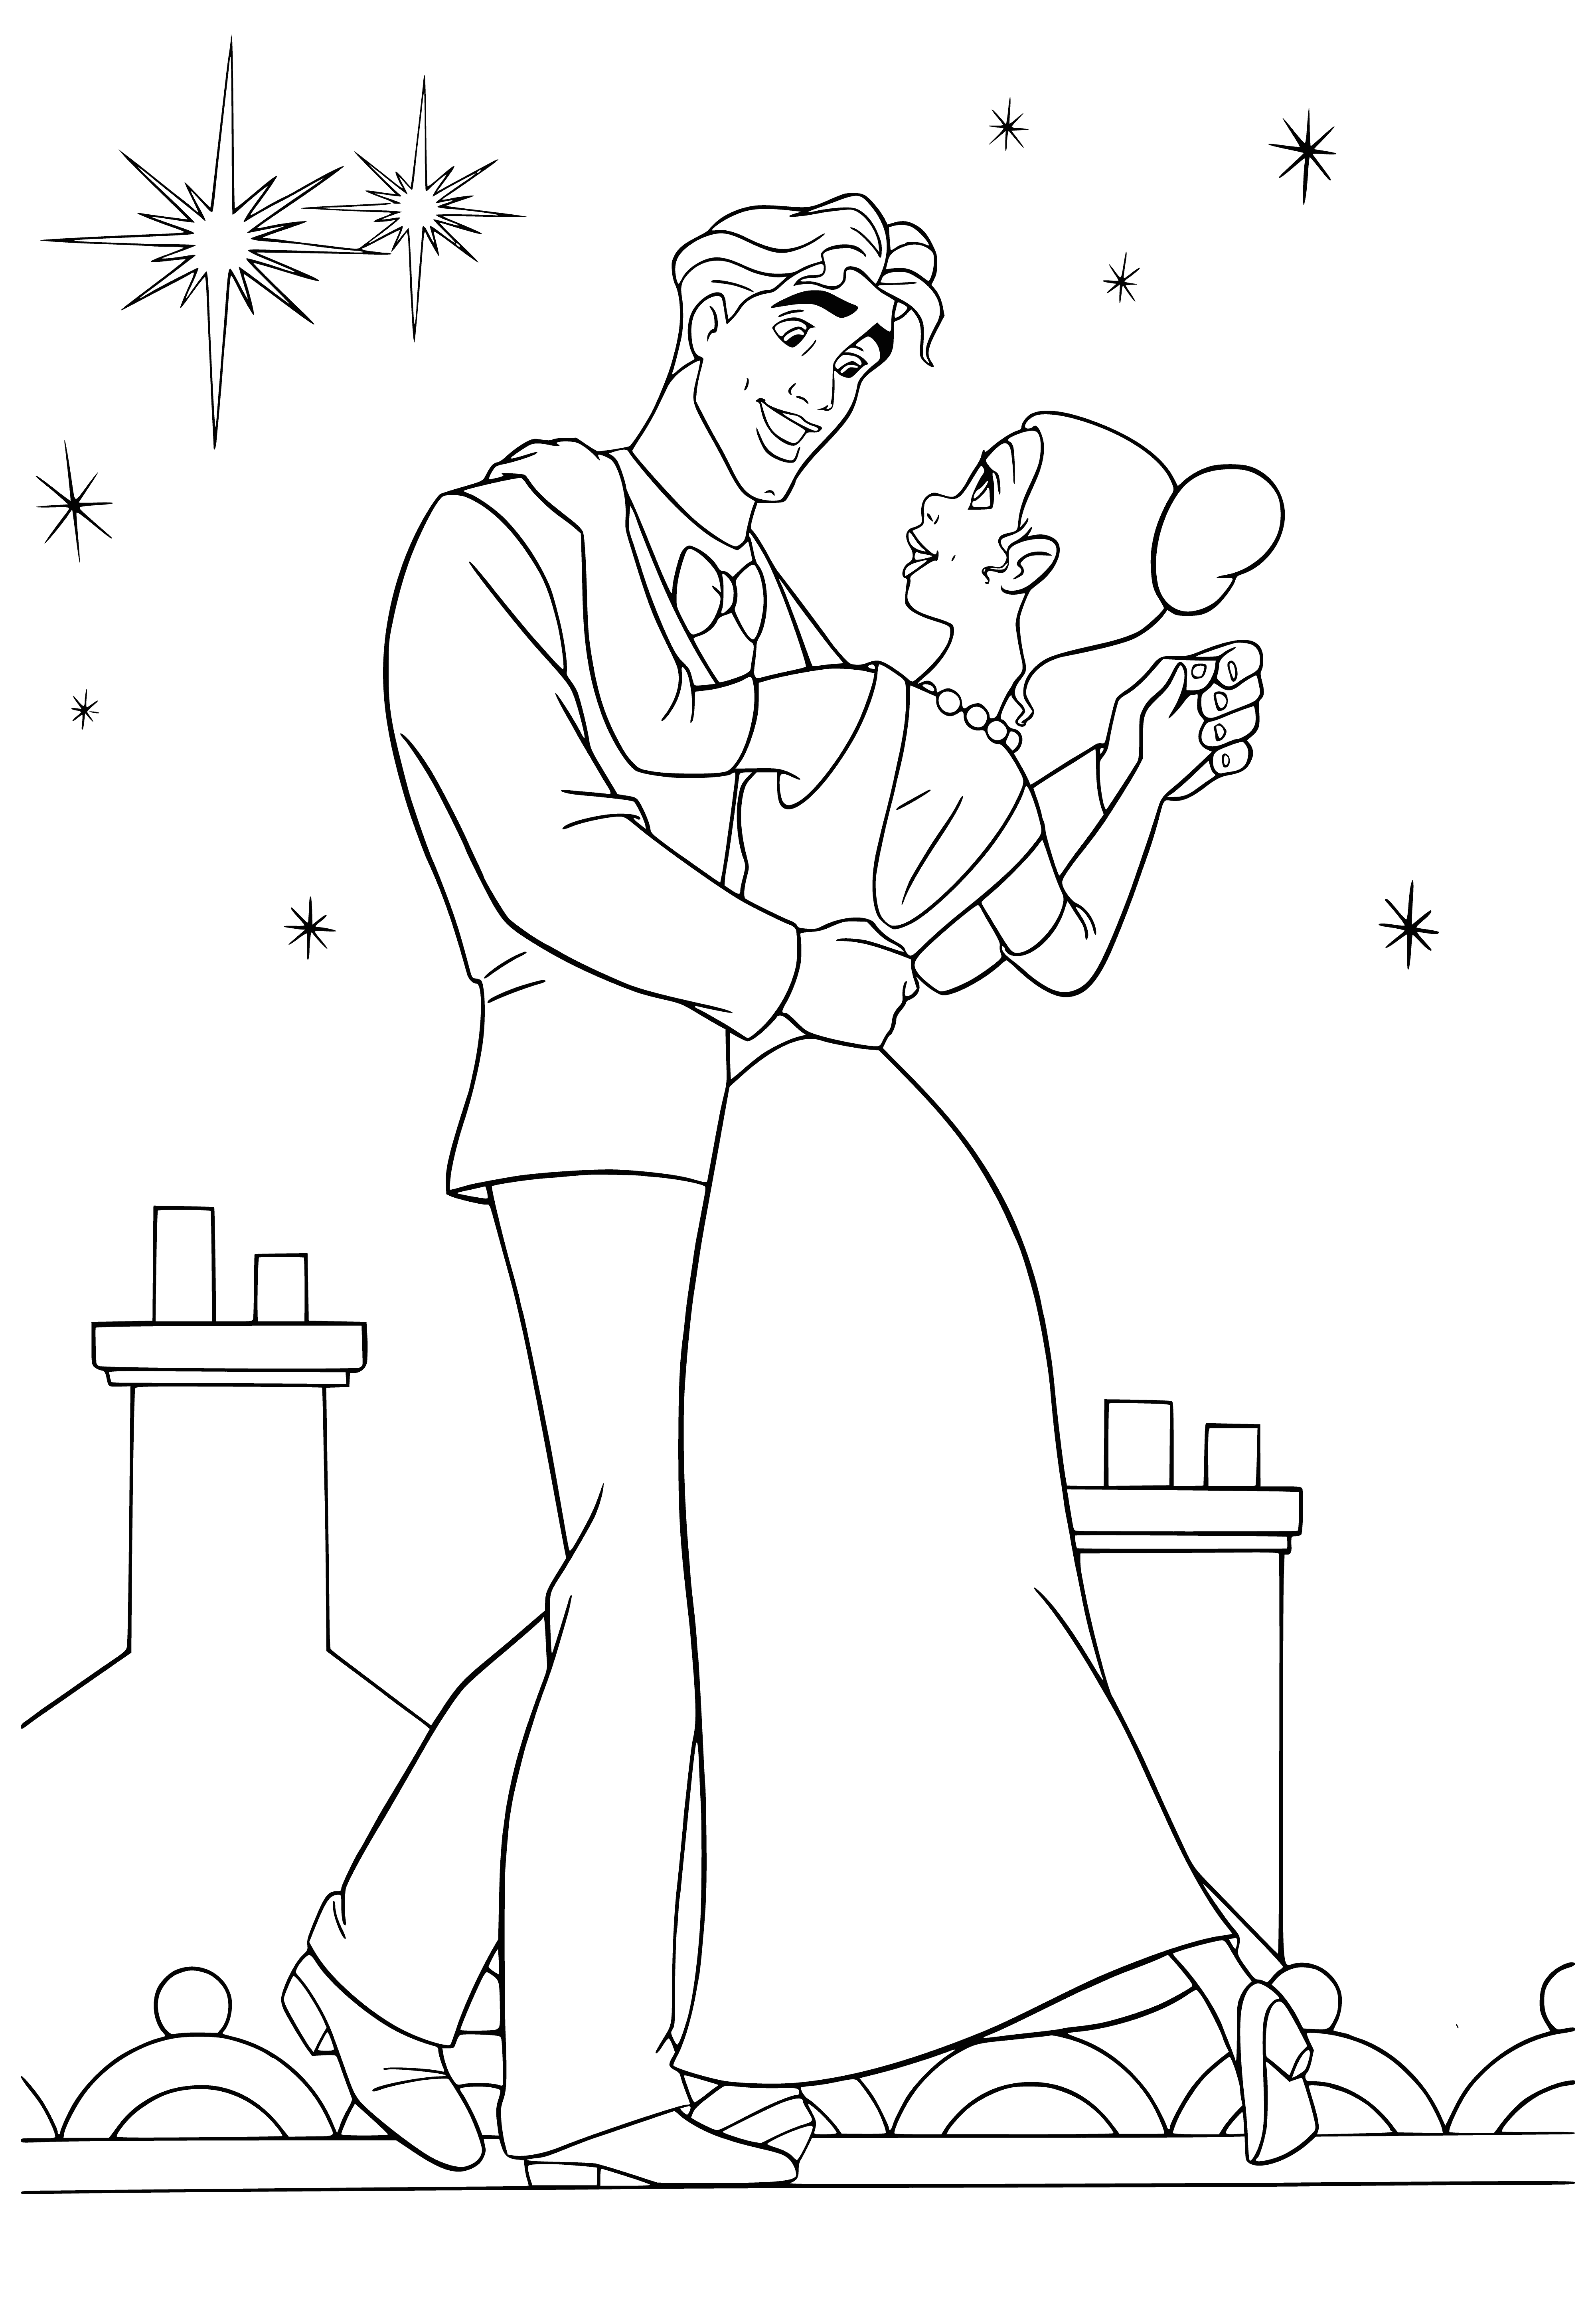 coloring page: Princess and prince dancing in dapper suit & beautiful gown, having the time of their lives swirling around the room.